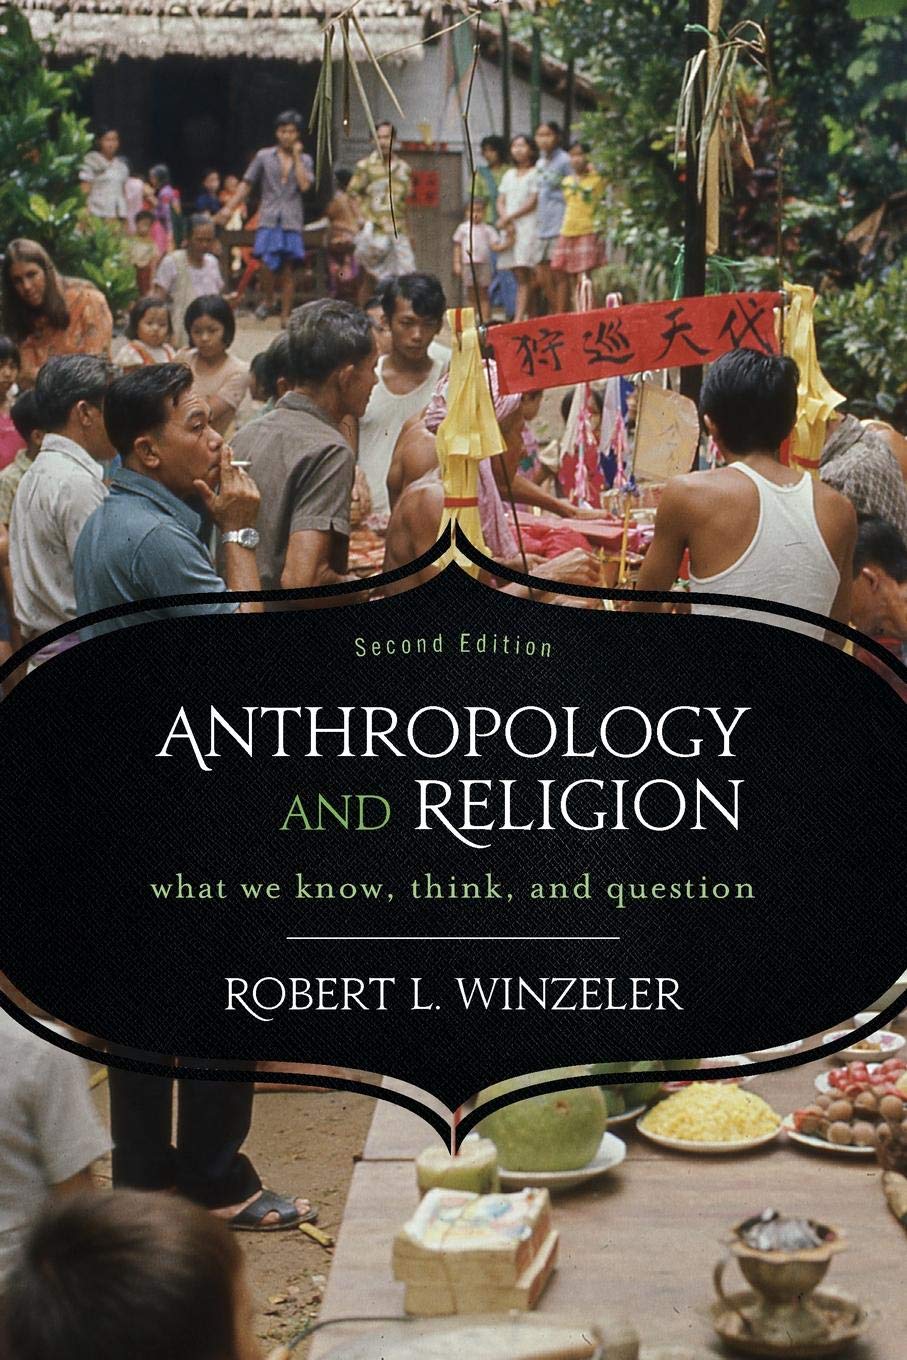 Anthropology and Religion | Robert L. Winzeler